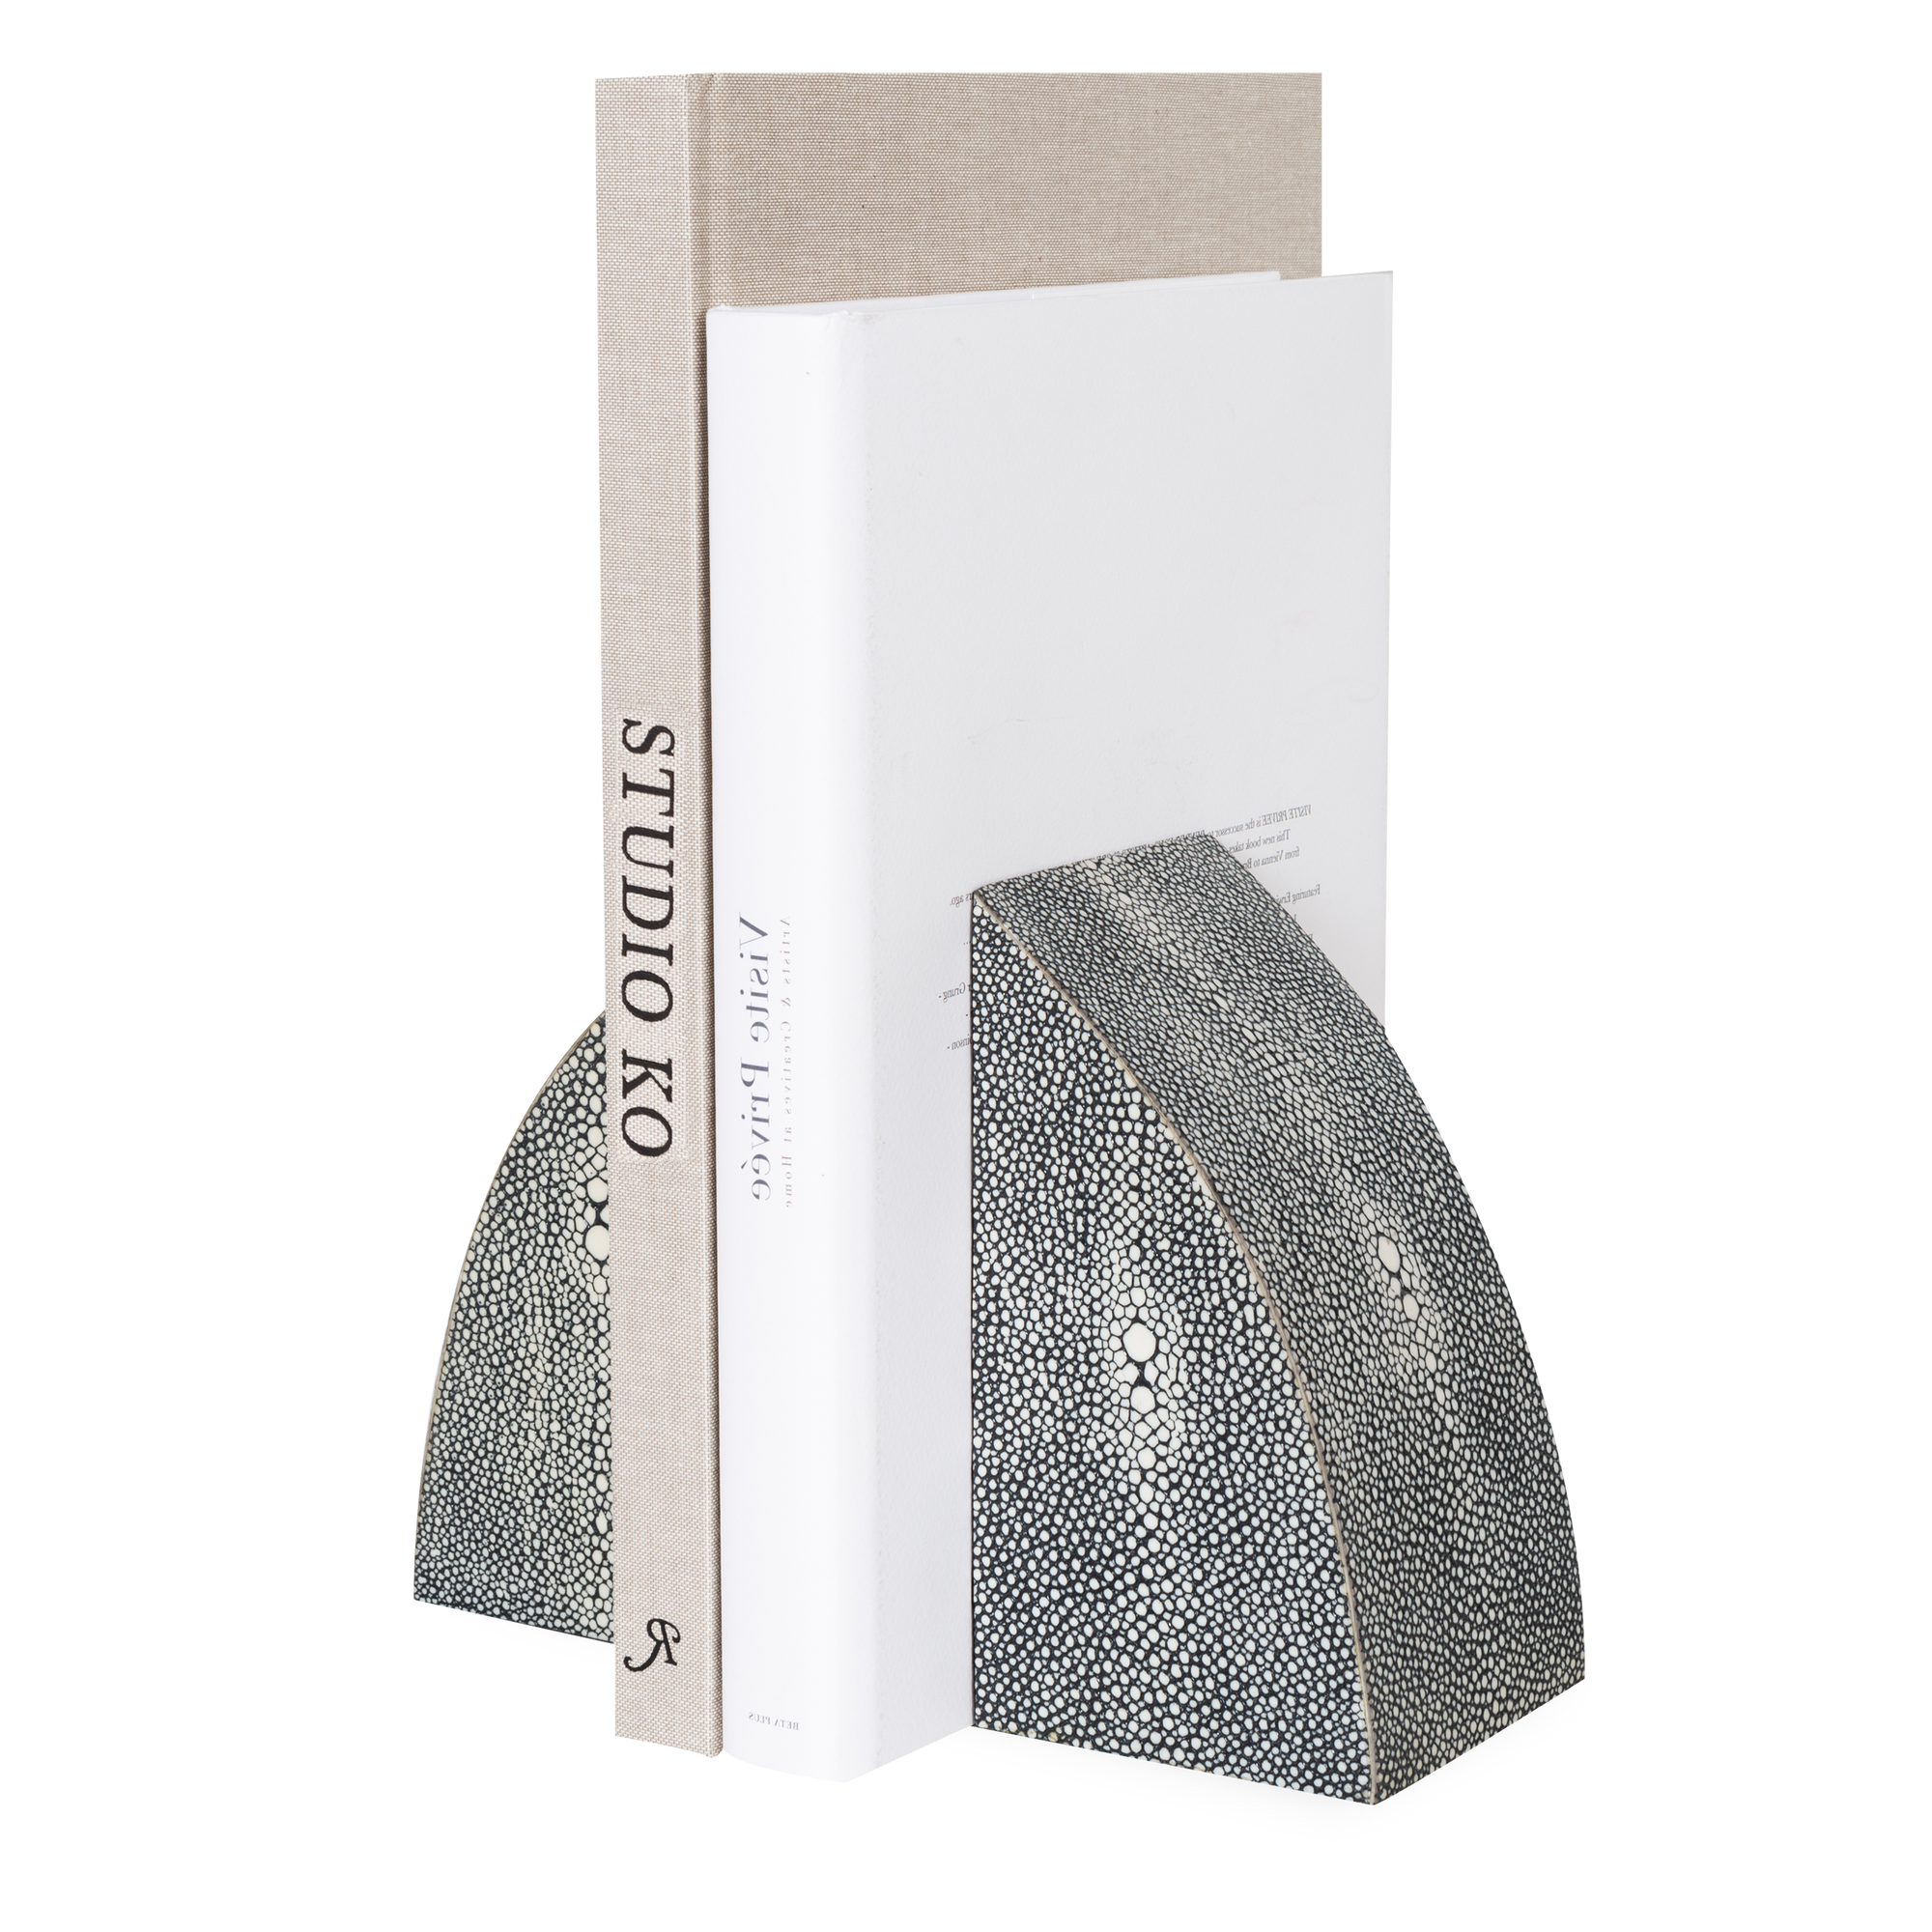 The Faux Shagreen Bookends feature a textured pattern in a light grey pattern with a curved edge.